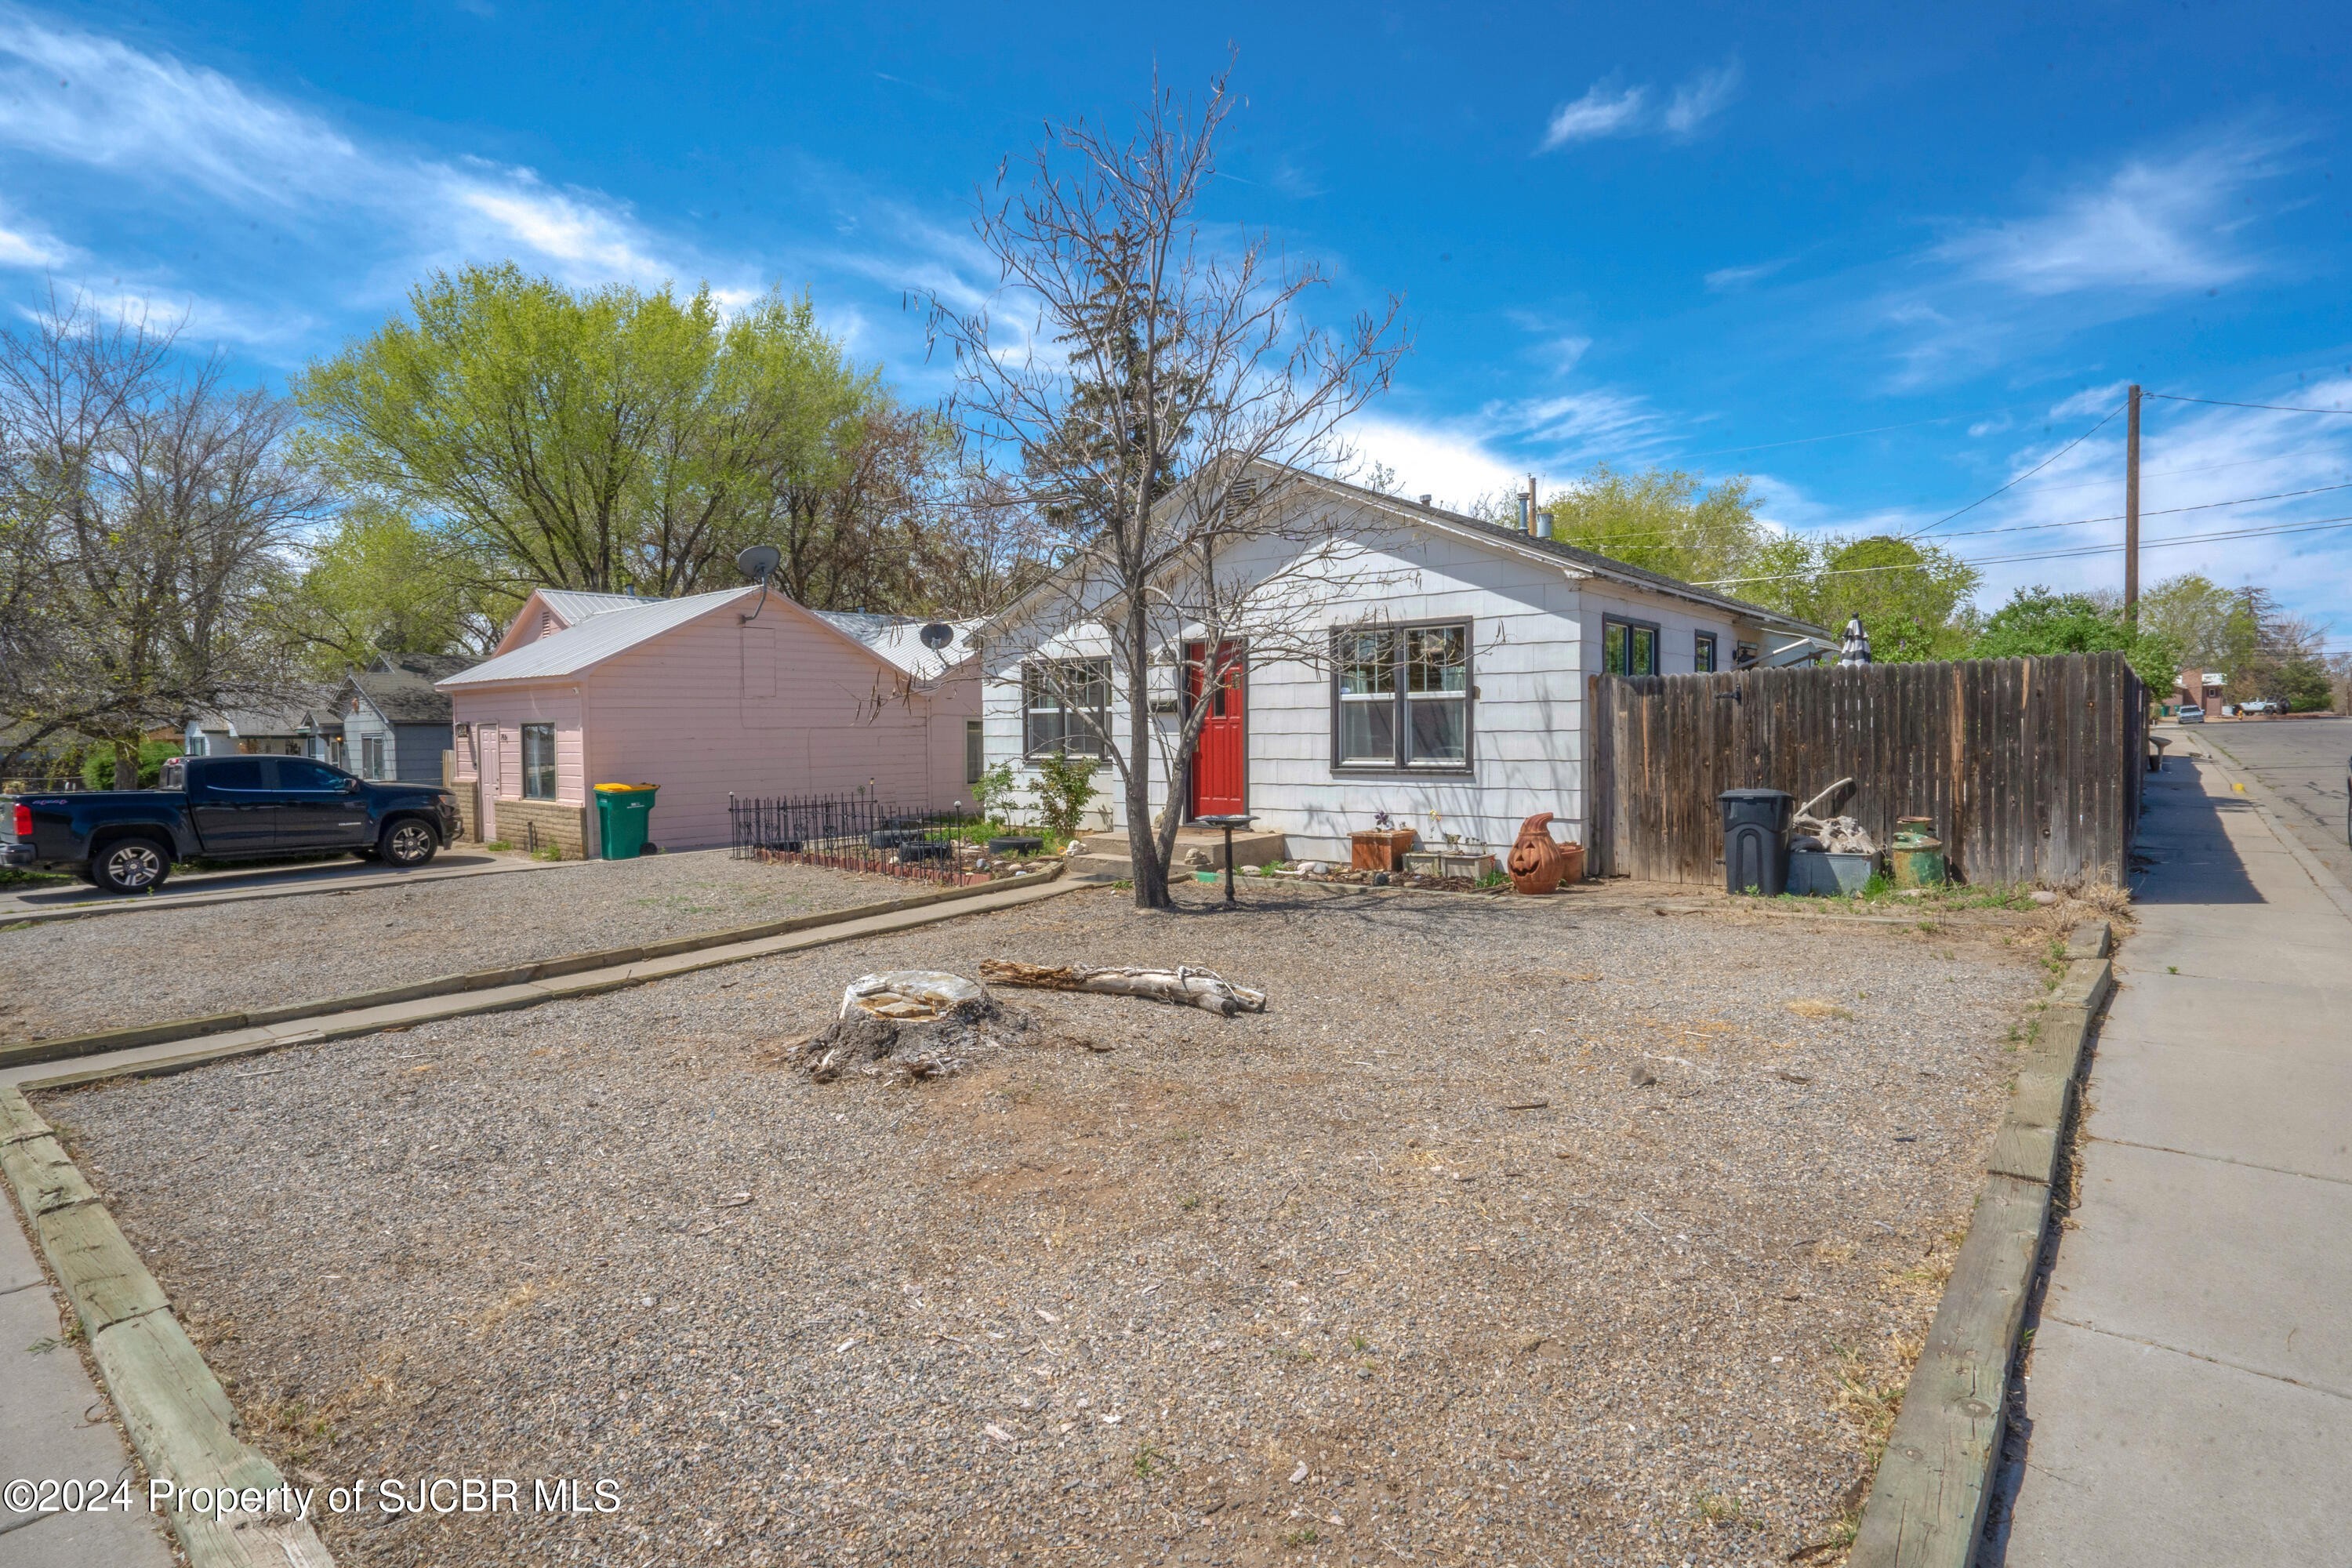 3. 715 N Orchard Avenue